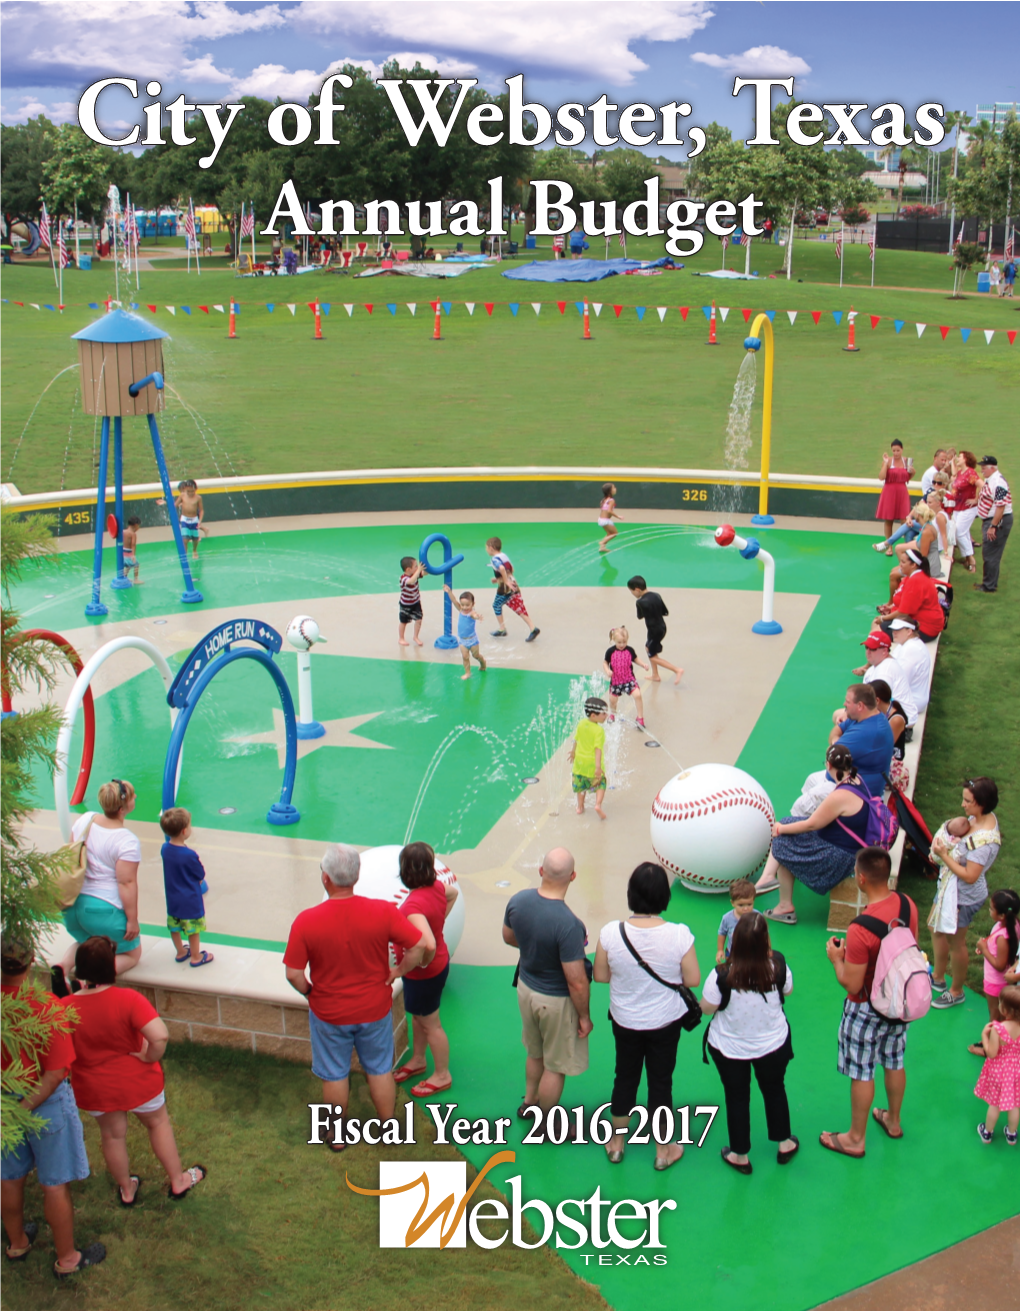 City of Webster, Texas Annual Budget